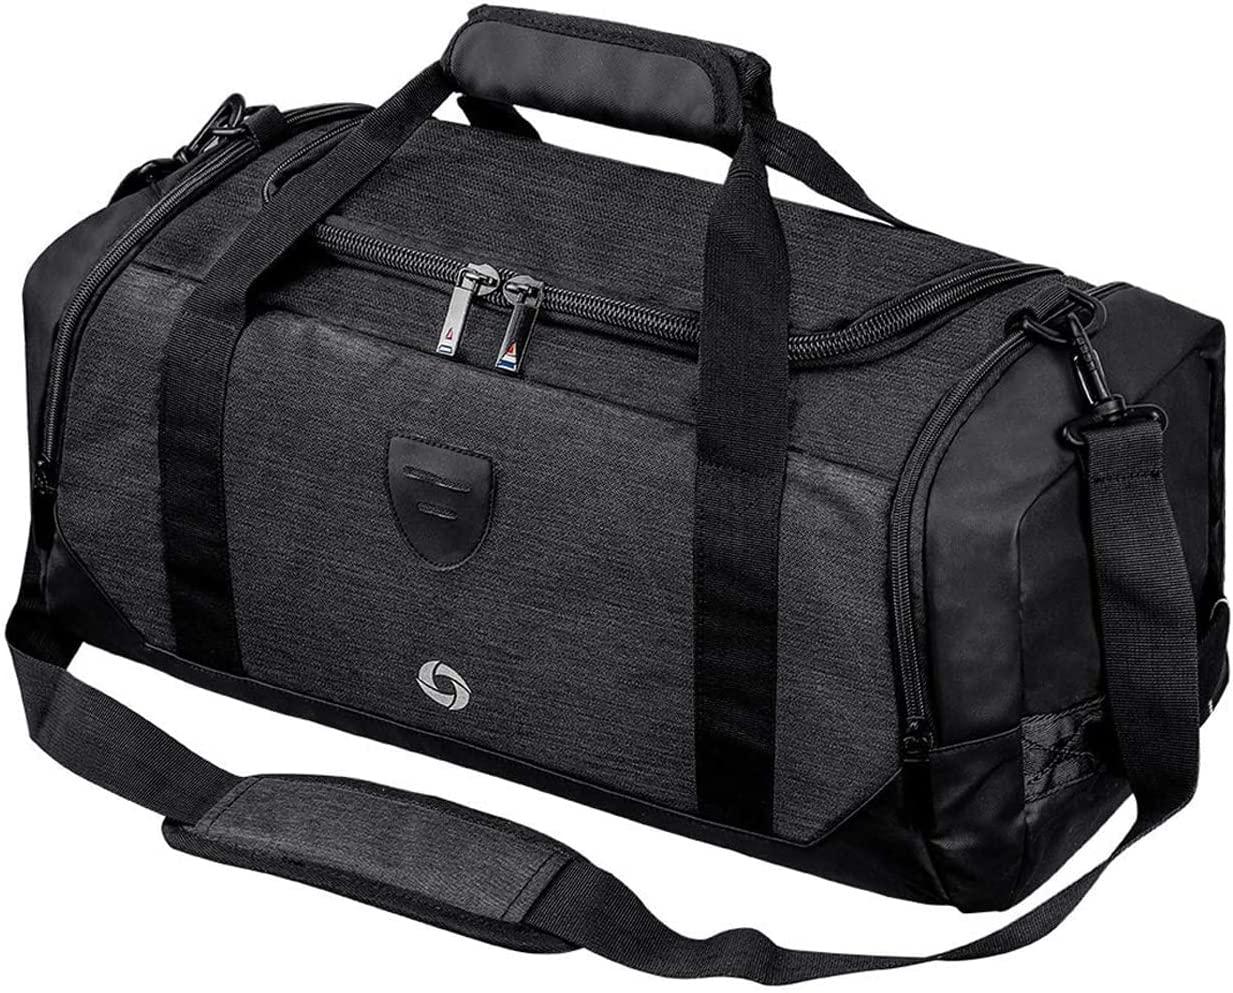  Gym Bag for Men and Women Sports Duffle bag Travel Backpack  Weekender Overnight Bag with Shoes Compartment Black - MIYCOO